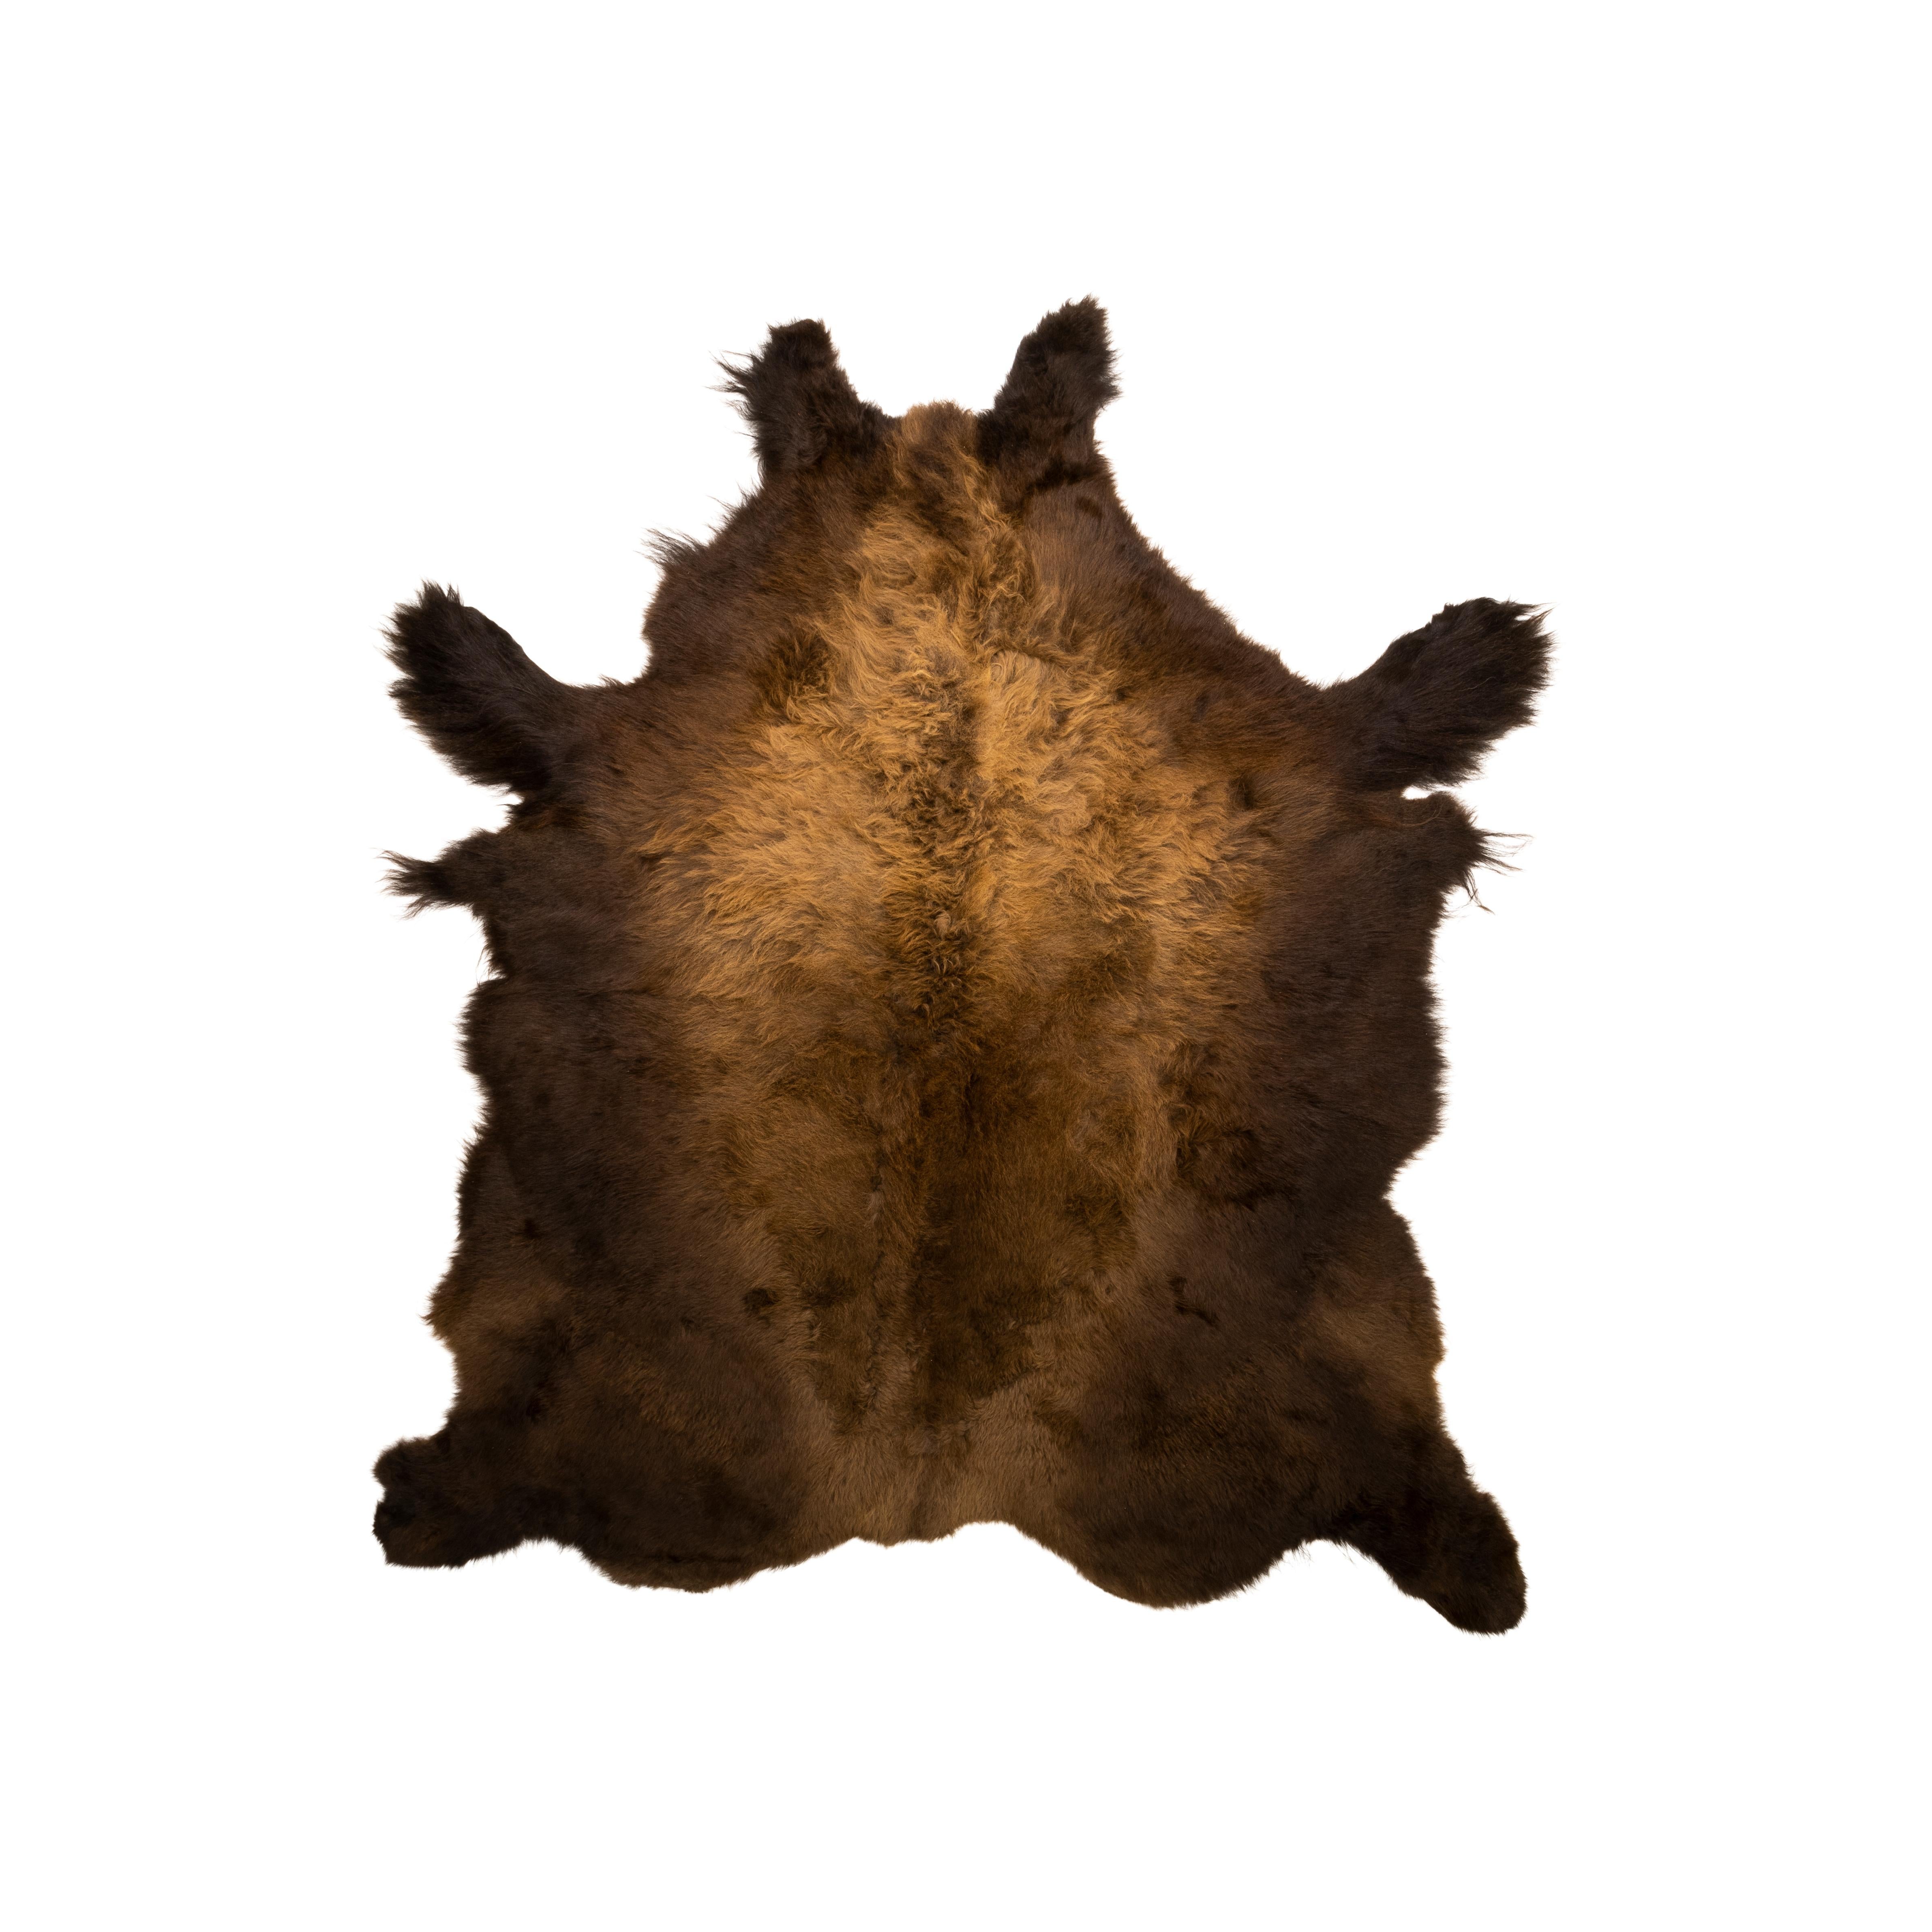 Extra large Montana buffalo hide. Long winter bi-color hair. Nice dark rich color.  Great lodge piece. Perfect for floor, bed or wall in a cabin, drape, robe or lodge. 

PERIOD: Contemporary
ORIGIN: United States, Montana
SIZE:  96